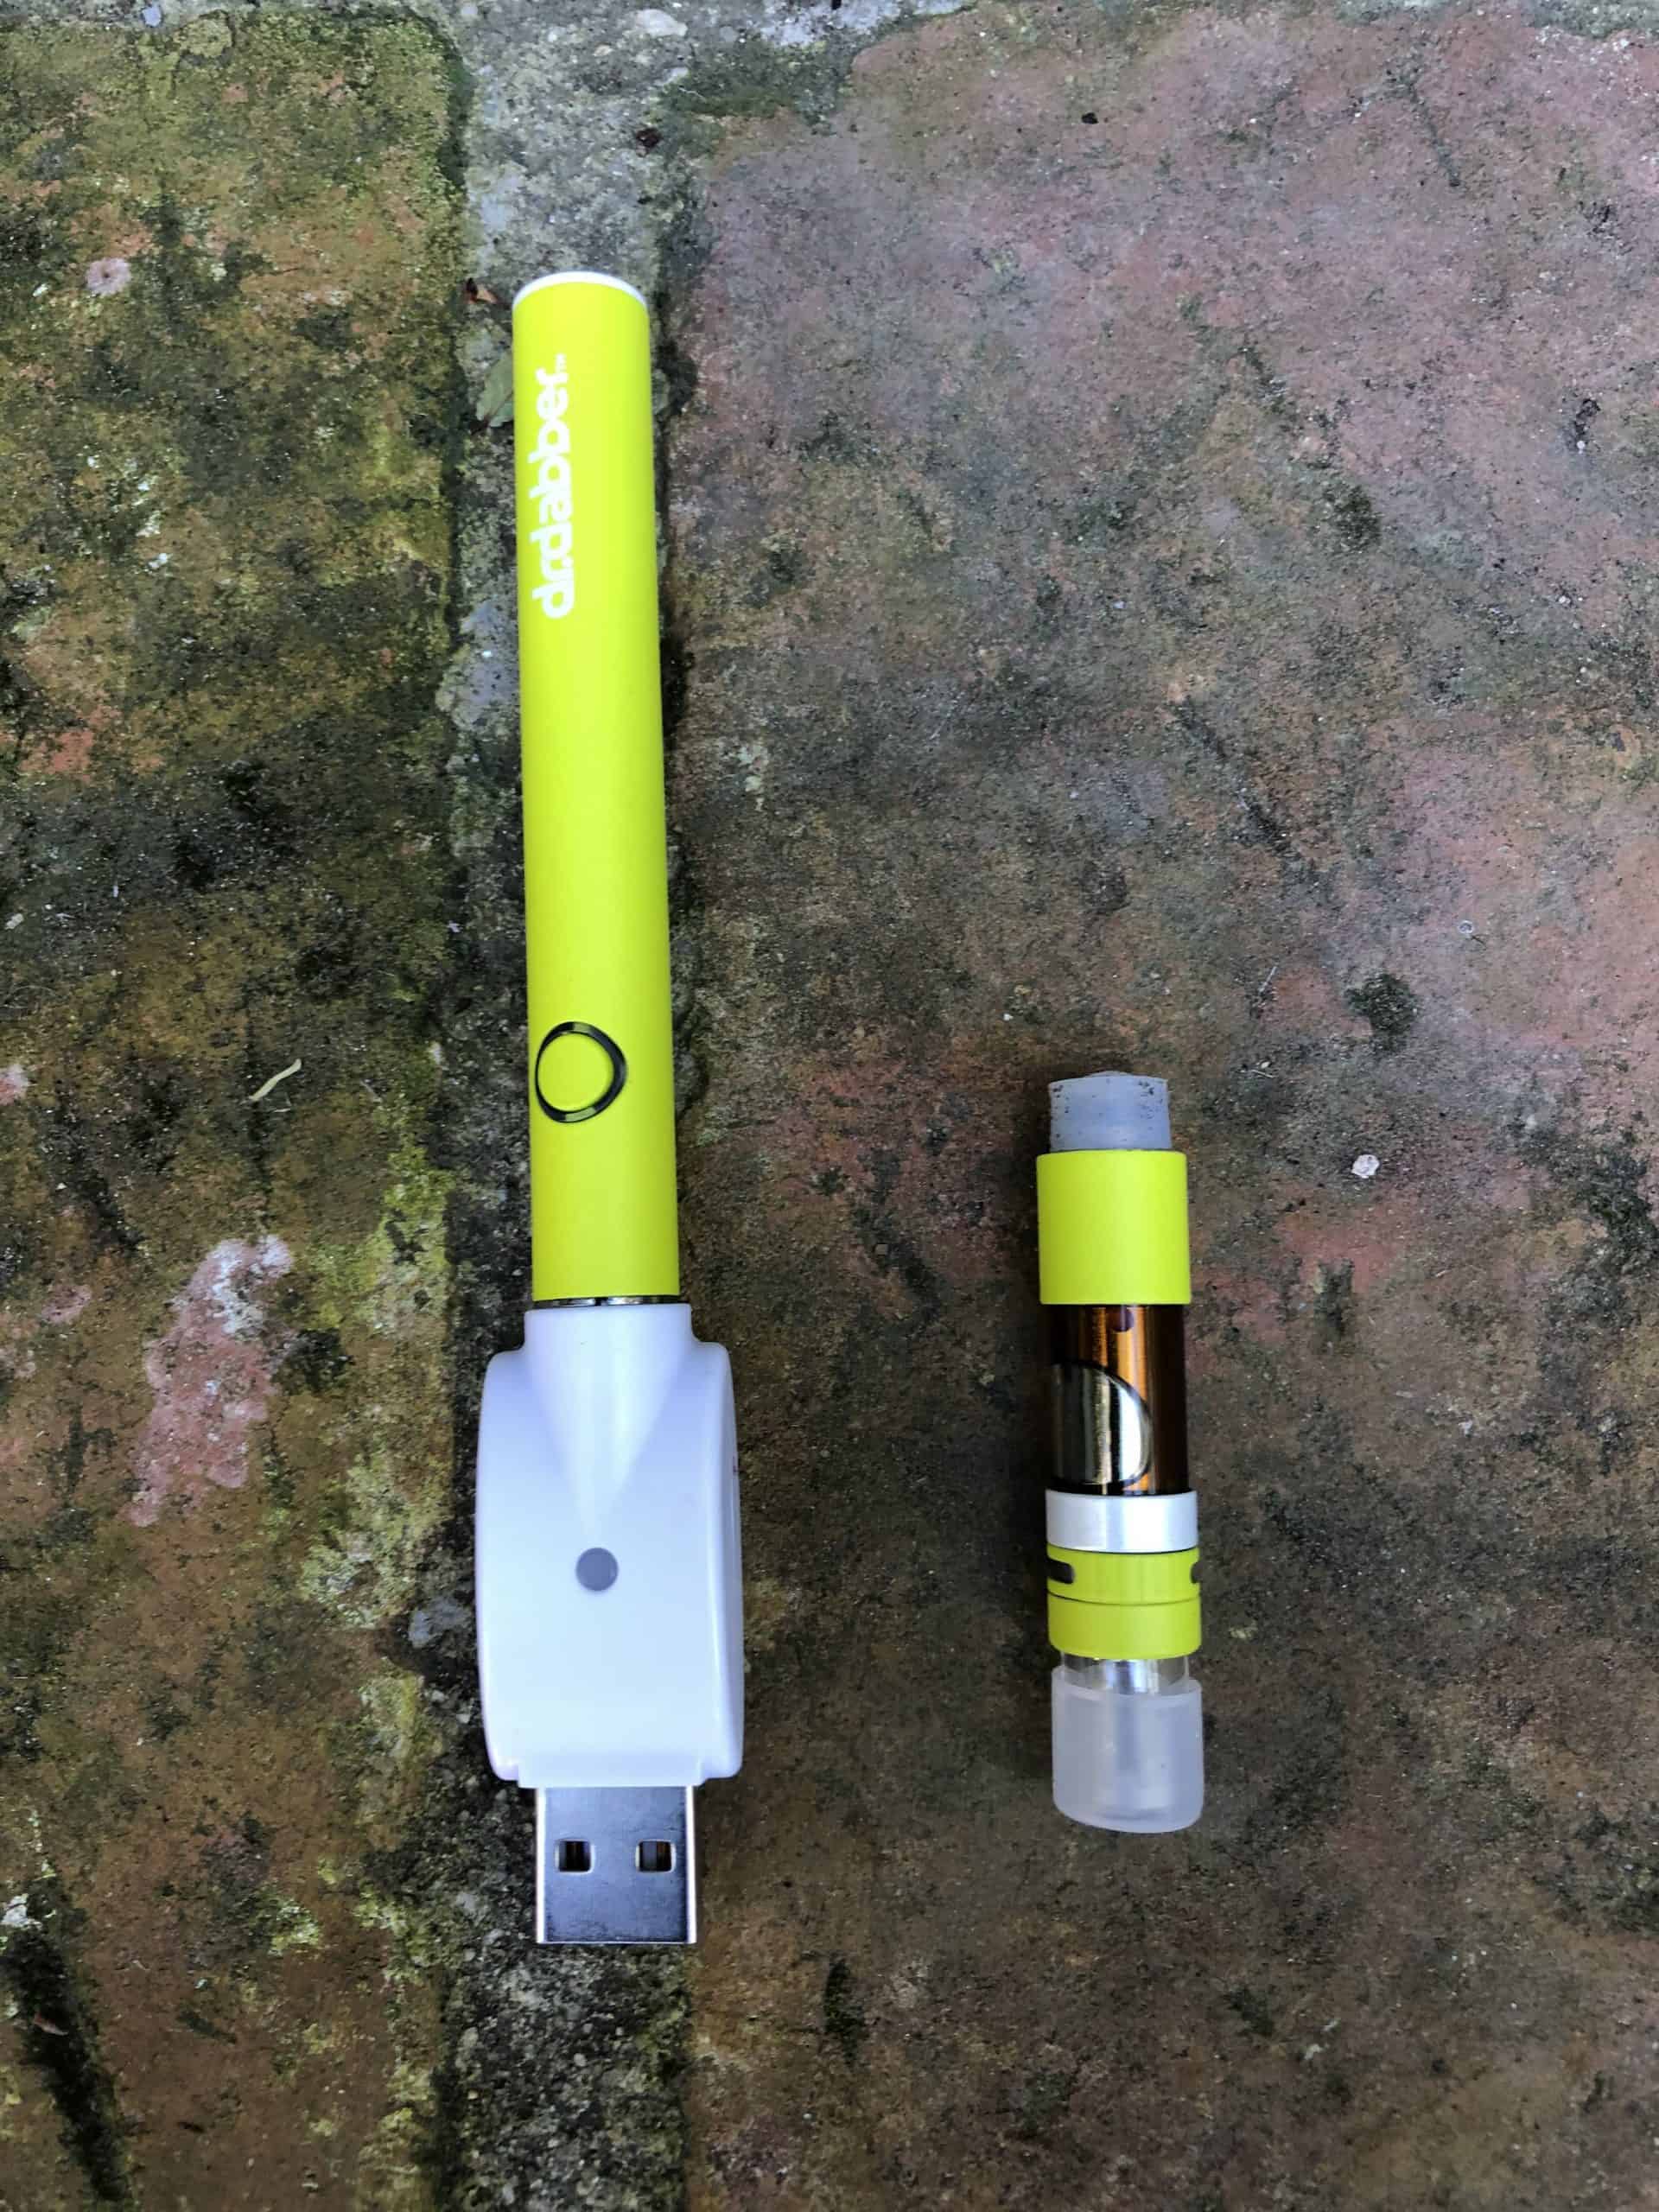 dr dabber cbd cartridge and battery combo fresh blend save on cannabis review specifications.